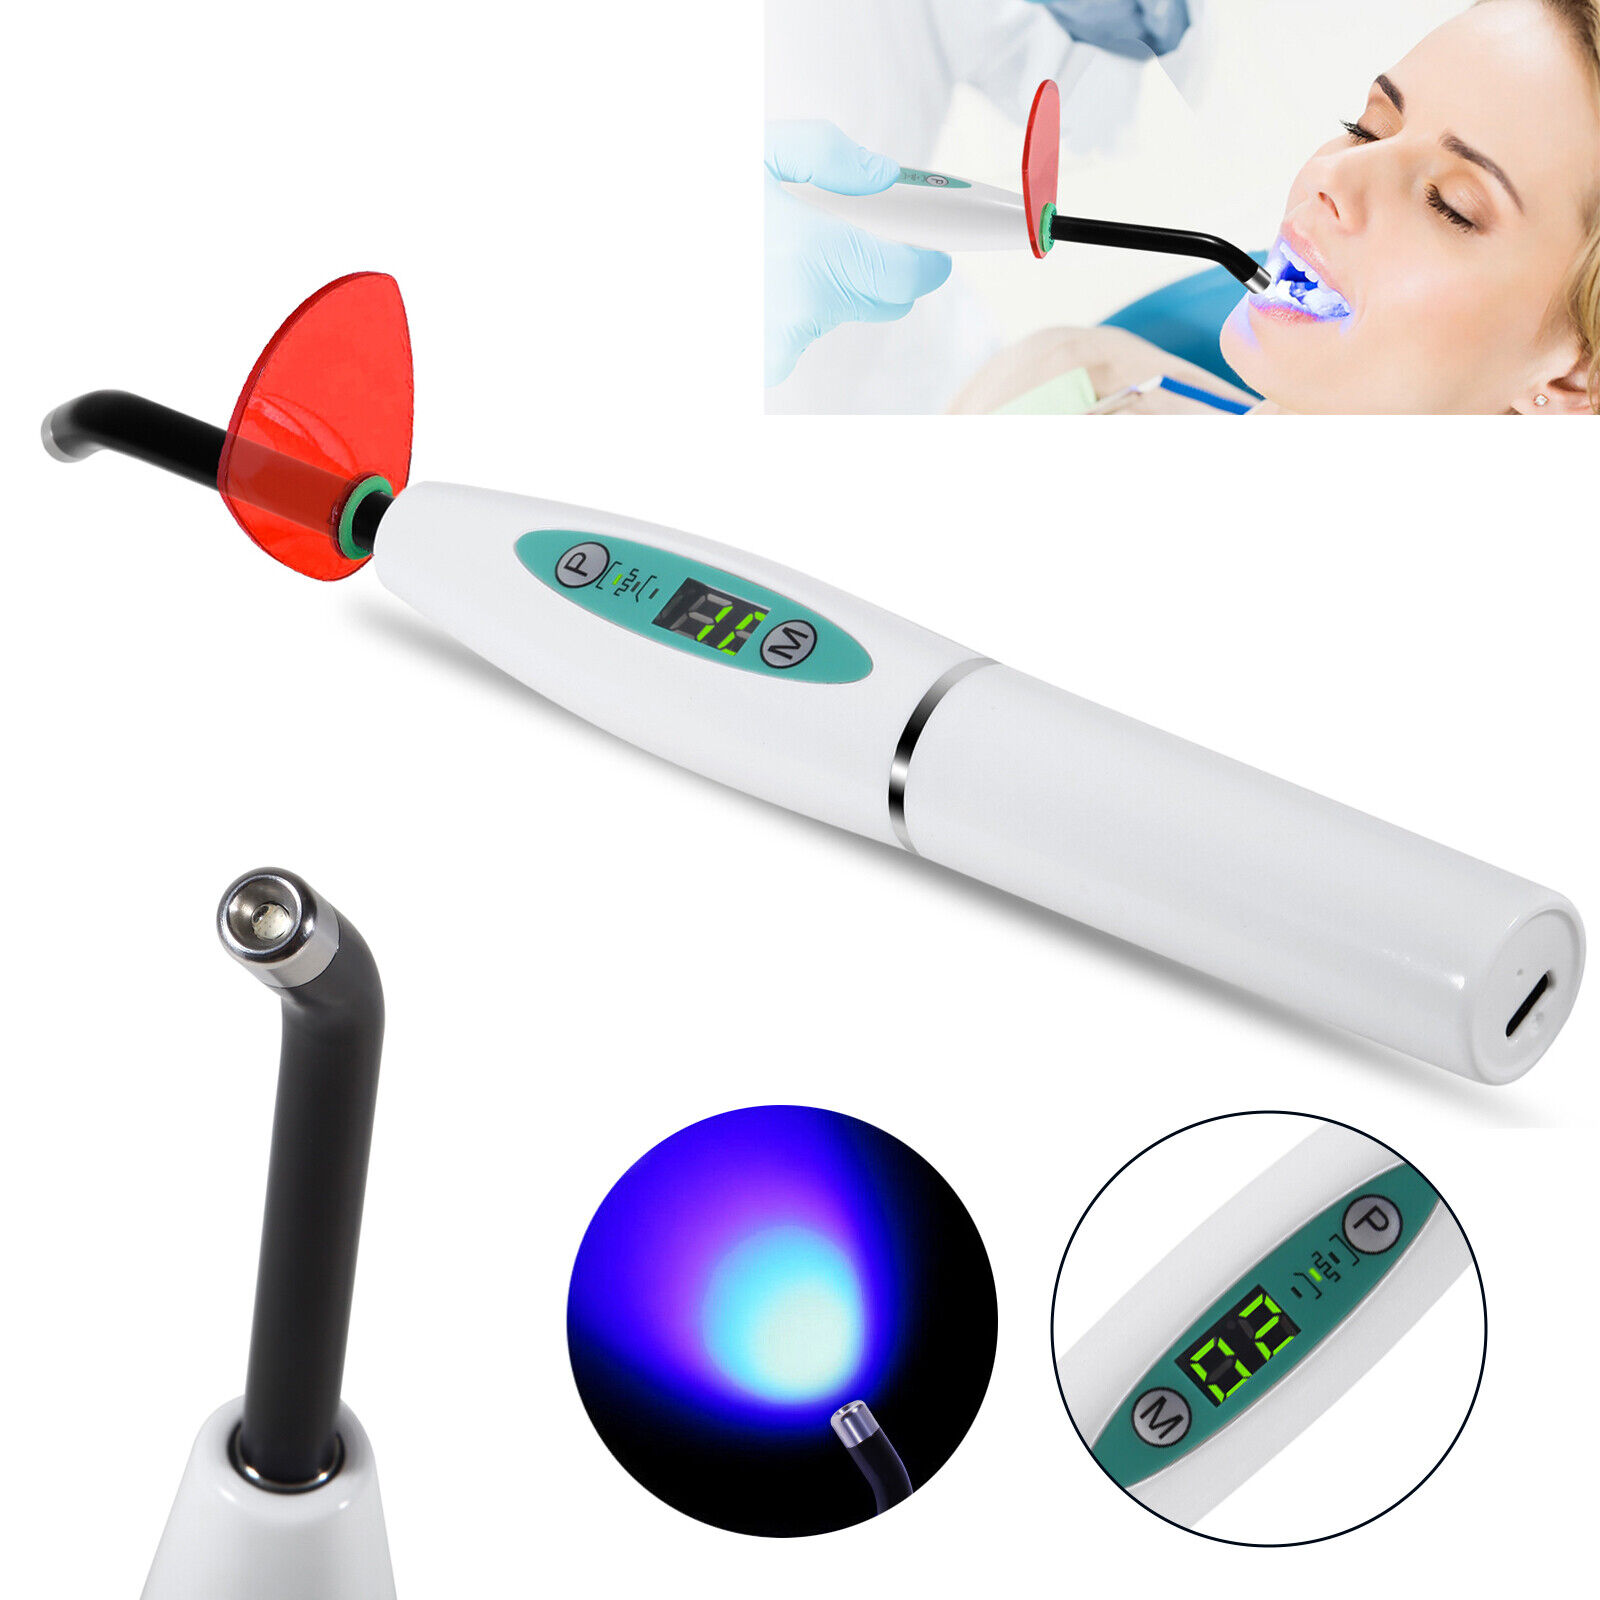 Dental LED Curing Light Lamp Wireless Cordless Resin Cure 5W 2000mW/cm² ns